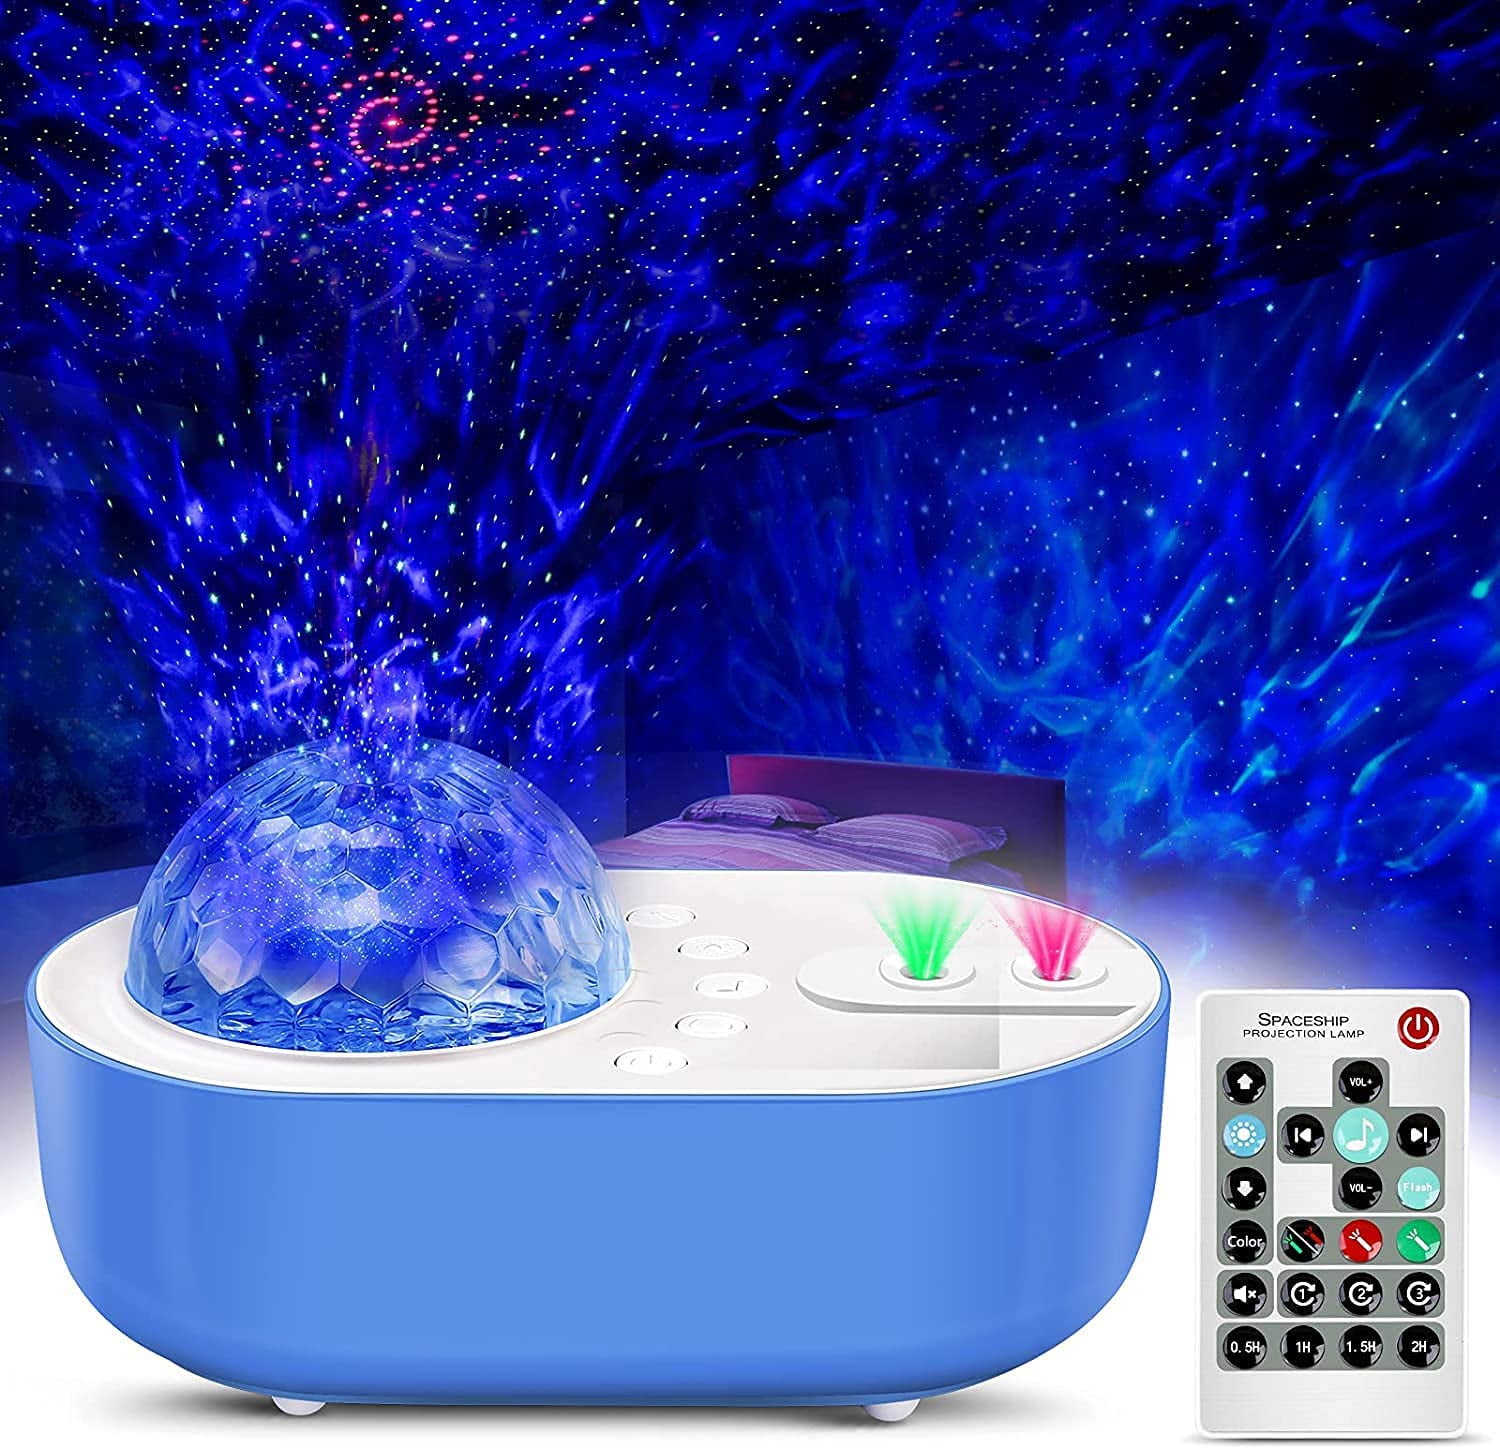 Star Projector, 3 Night Light Galaxy Projector Bluetooth Speaker, Ocean Wave Starry Projector for Decor Bedroom, Home Theatre, Game Rooms - Walmart.com